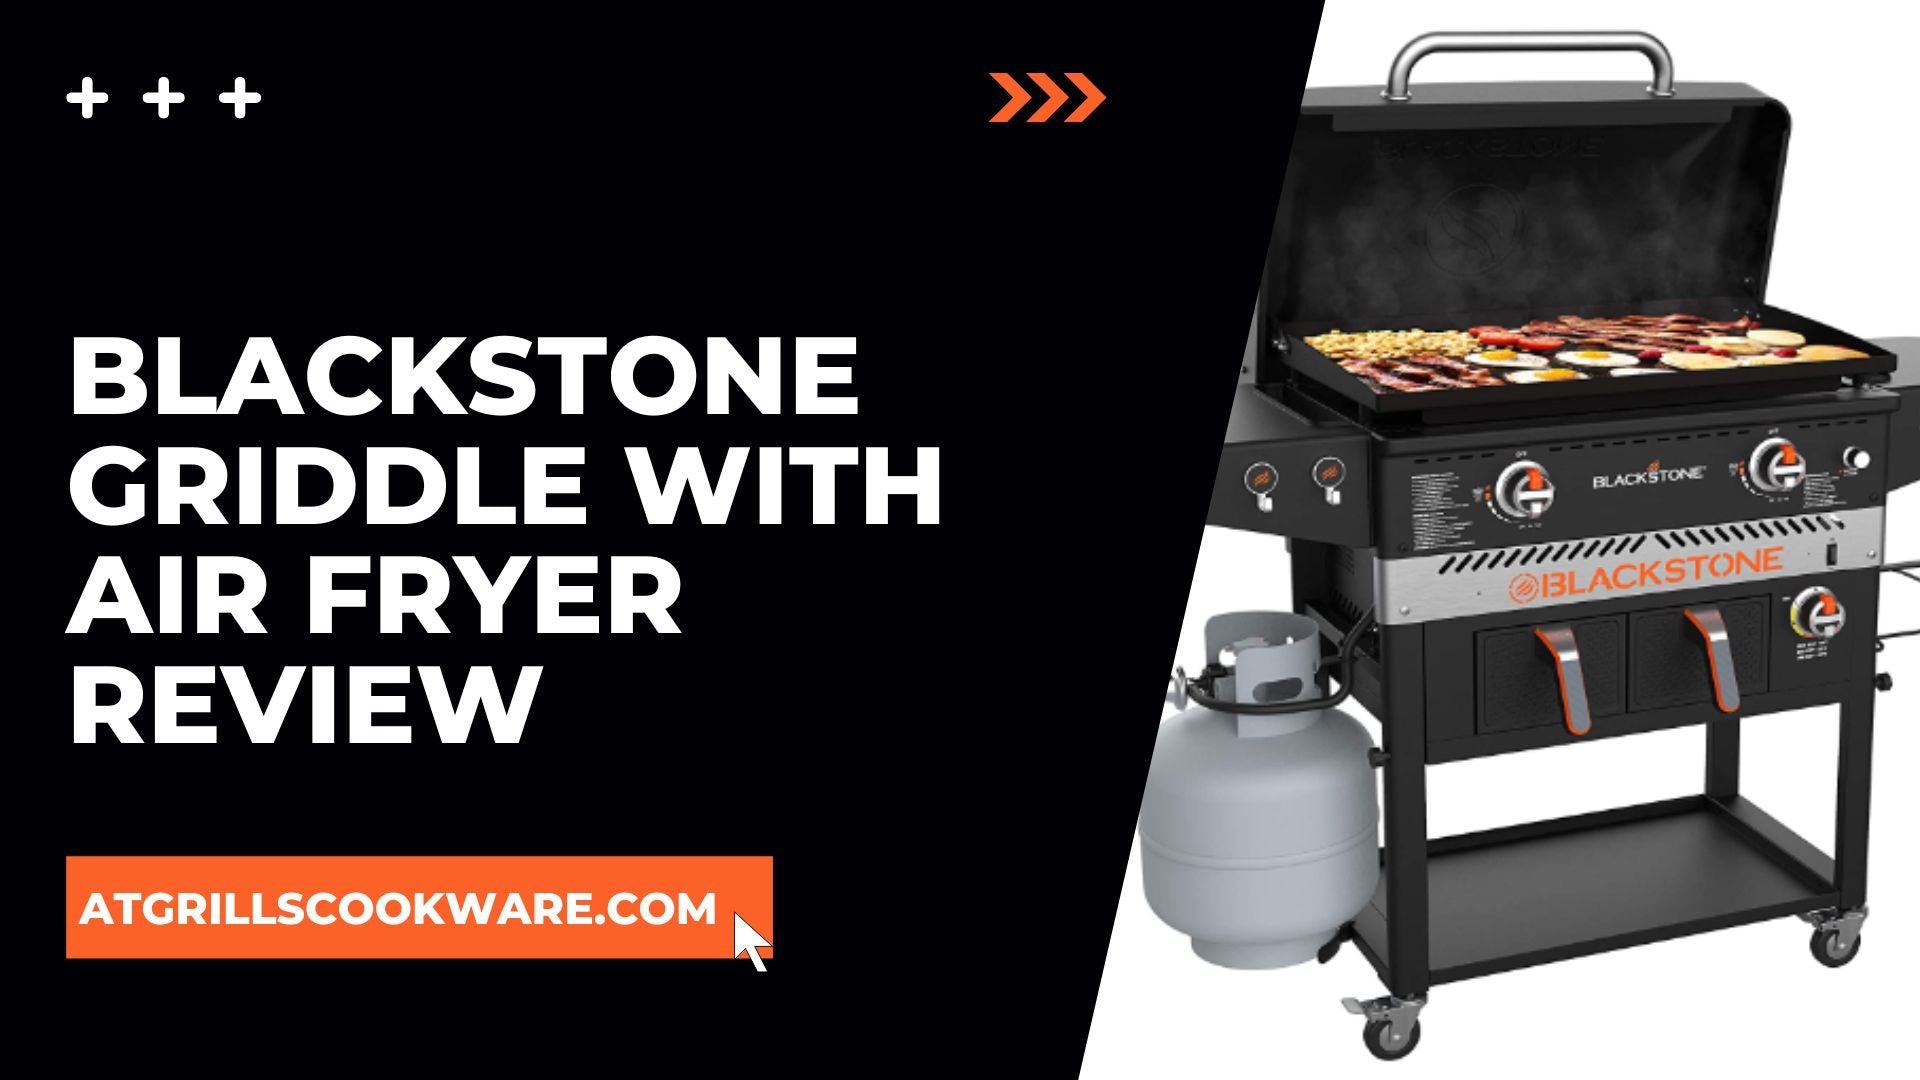 Blackstone Griddle With Air Fryer Review